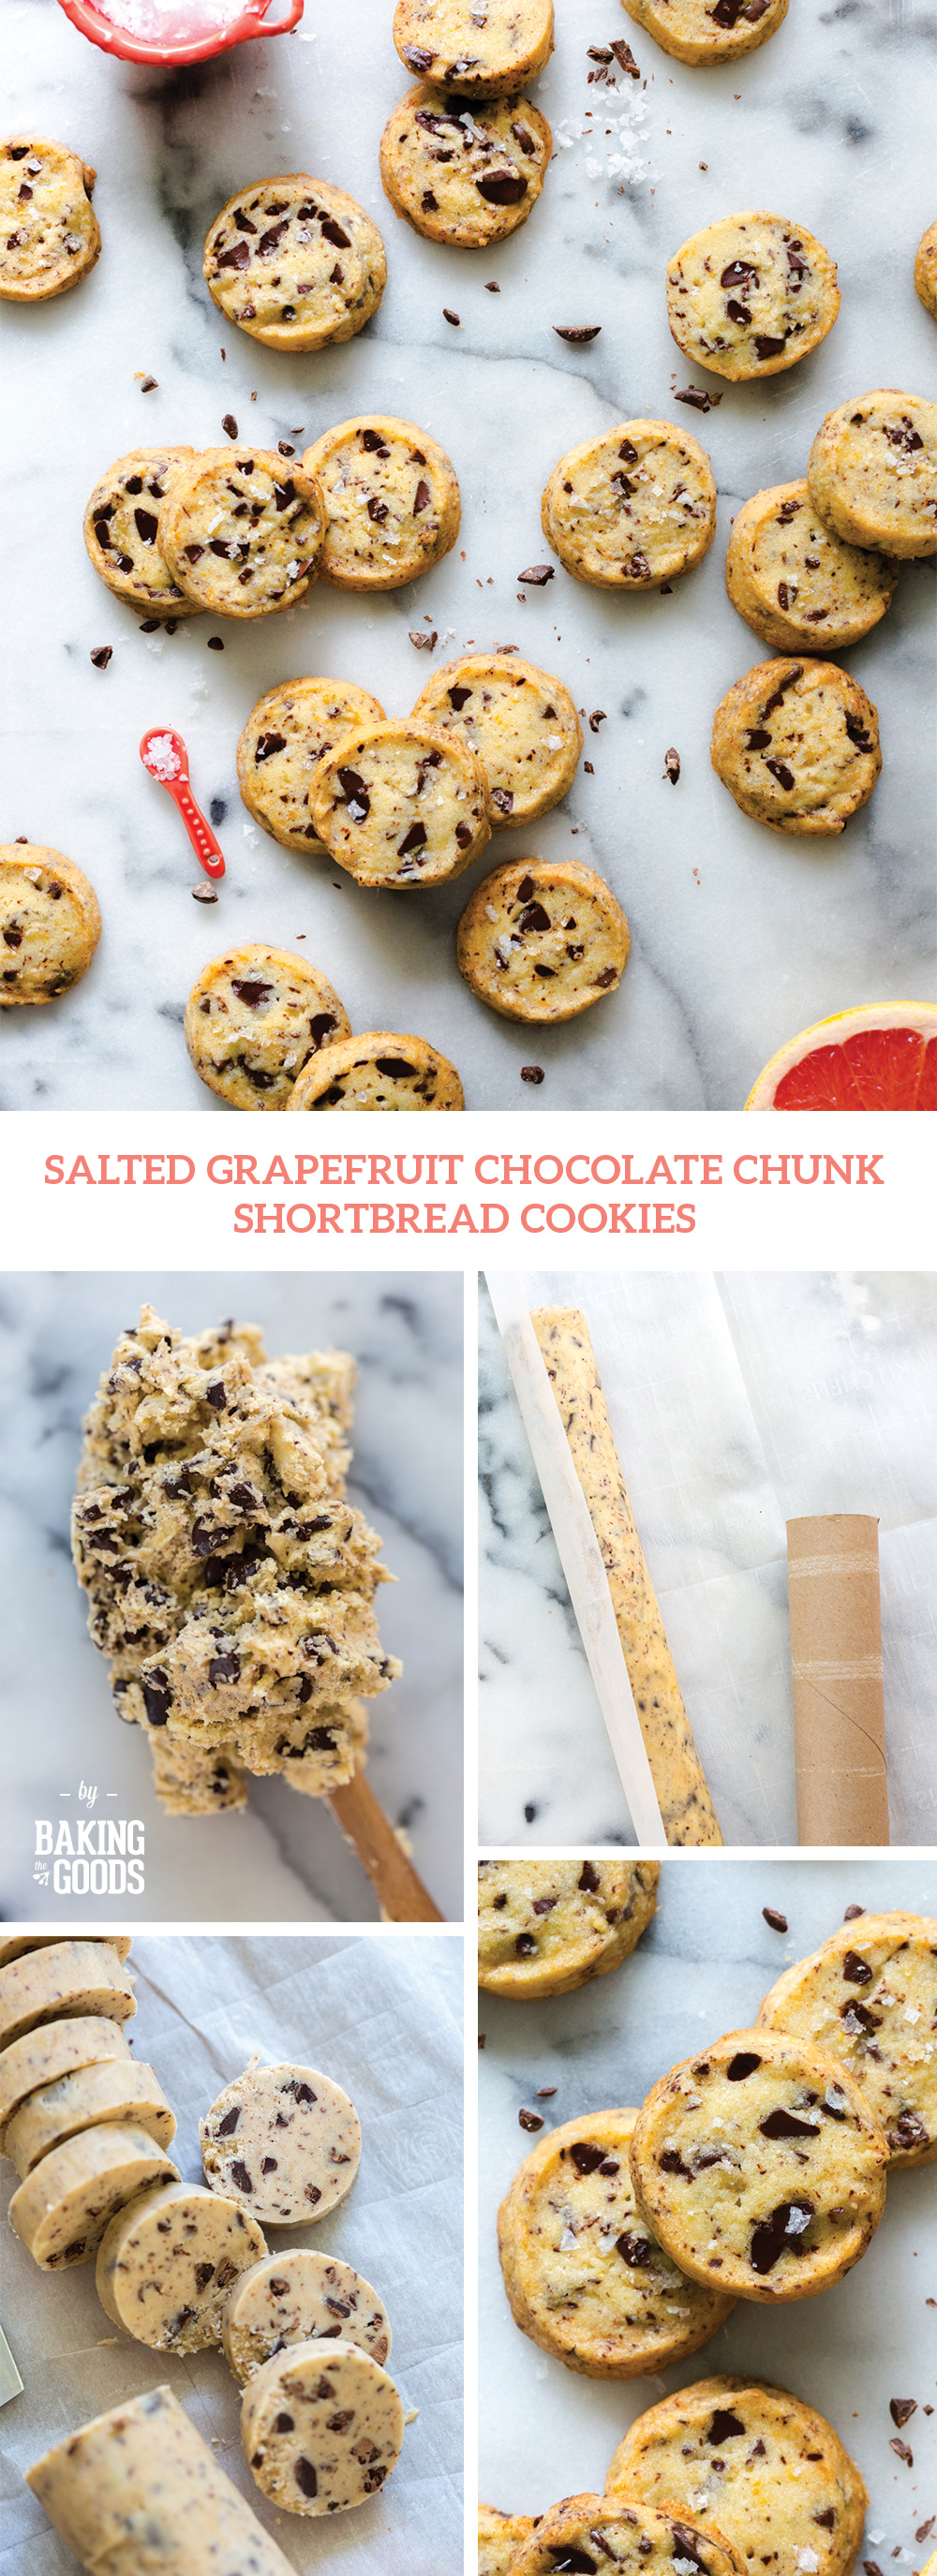 Salted Grapefruit Chocolate Chunk Shortbread Cookies by Baking The Goods.